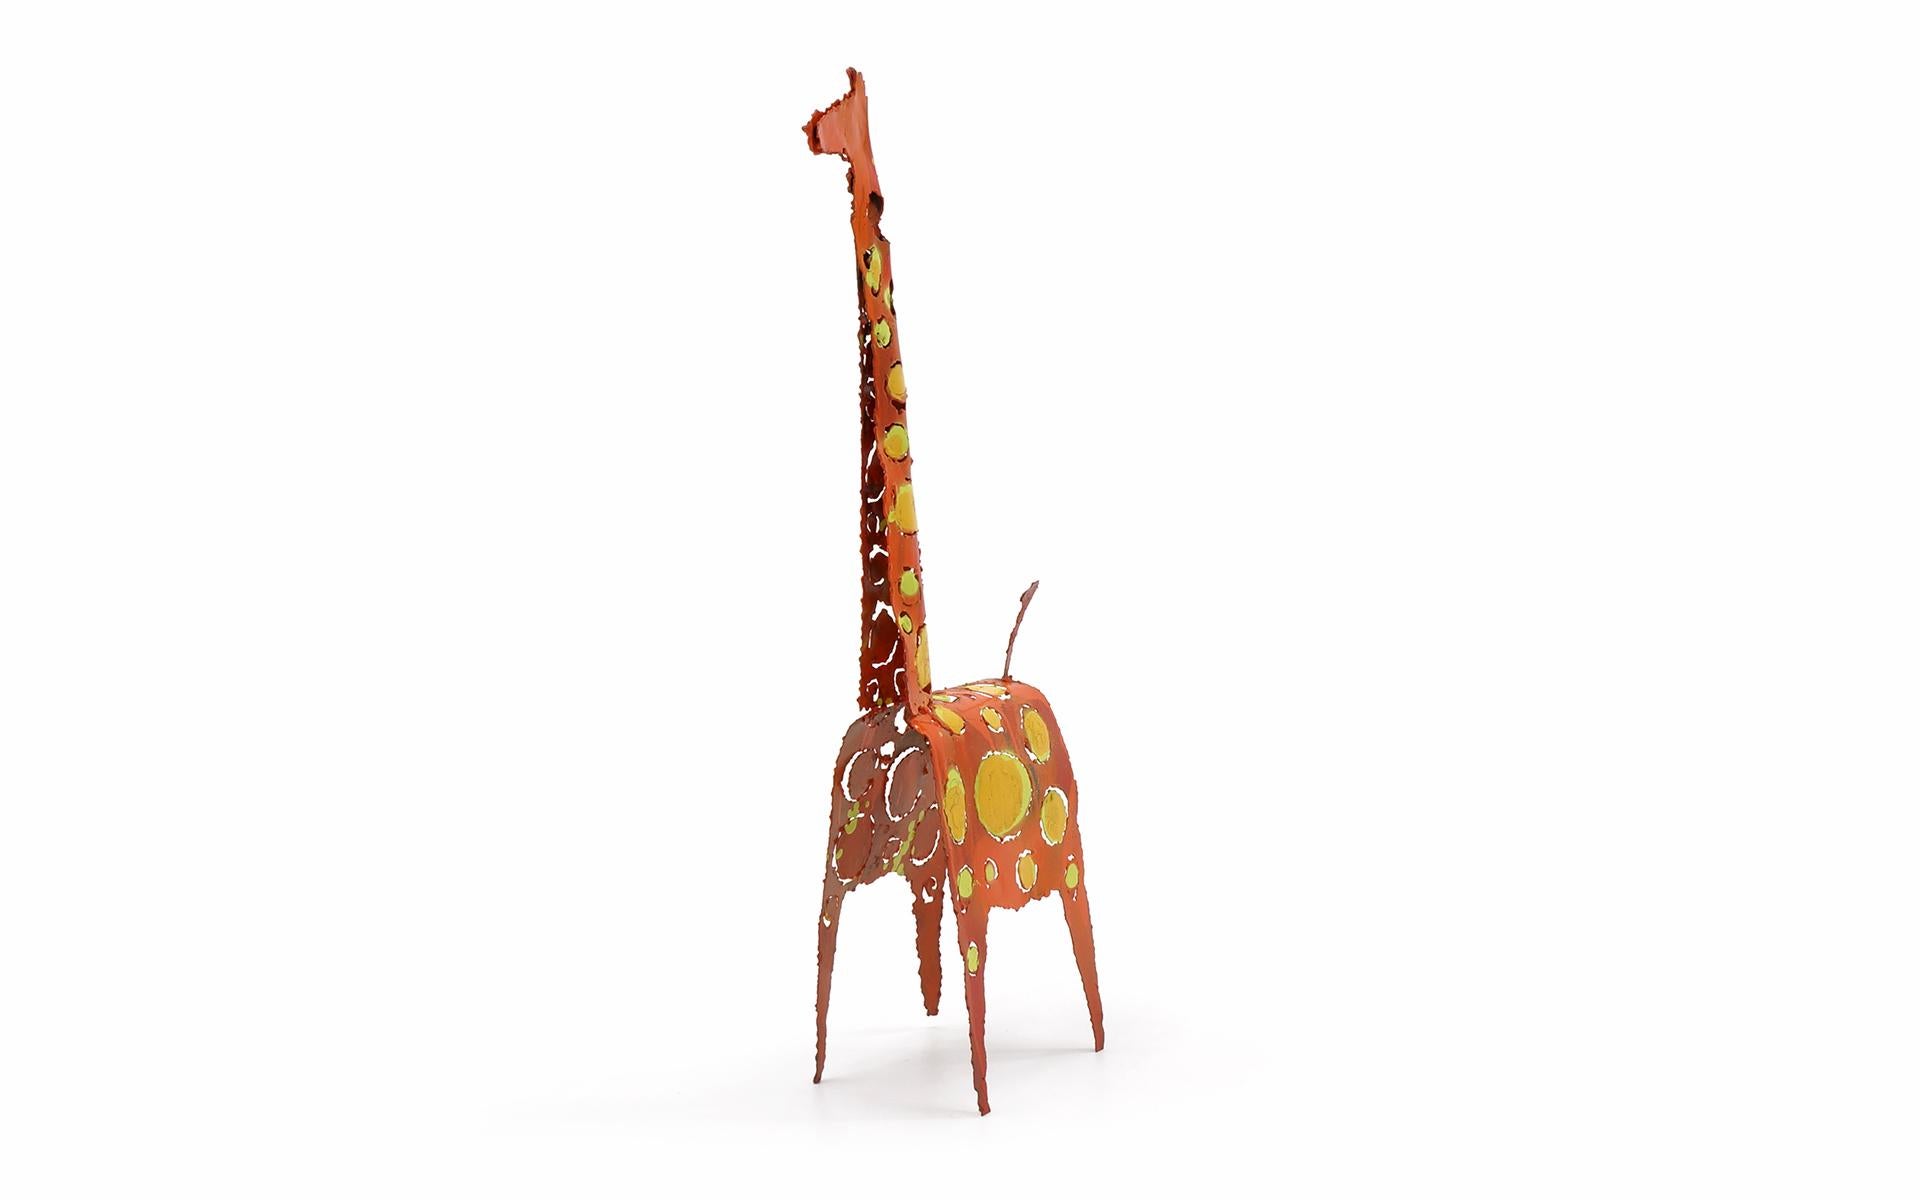 Tabletop girafe sculpture by James Bearden. Enameled torch cut steel in orange and yellow.